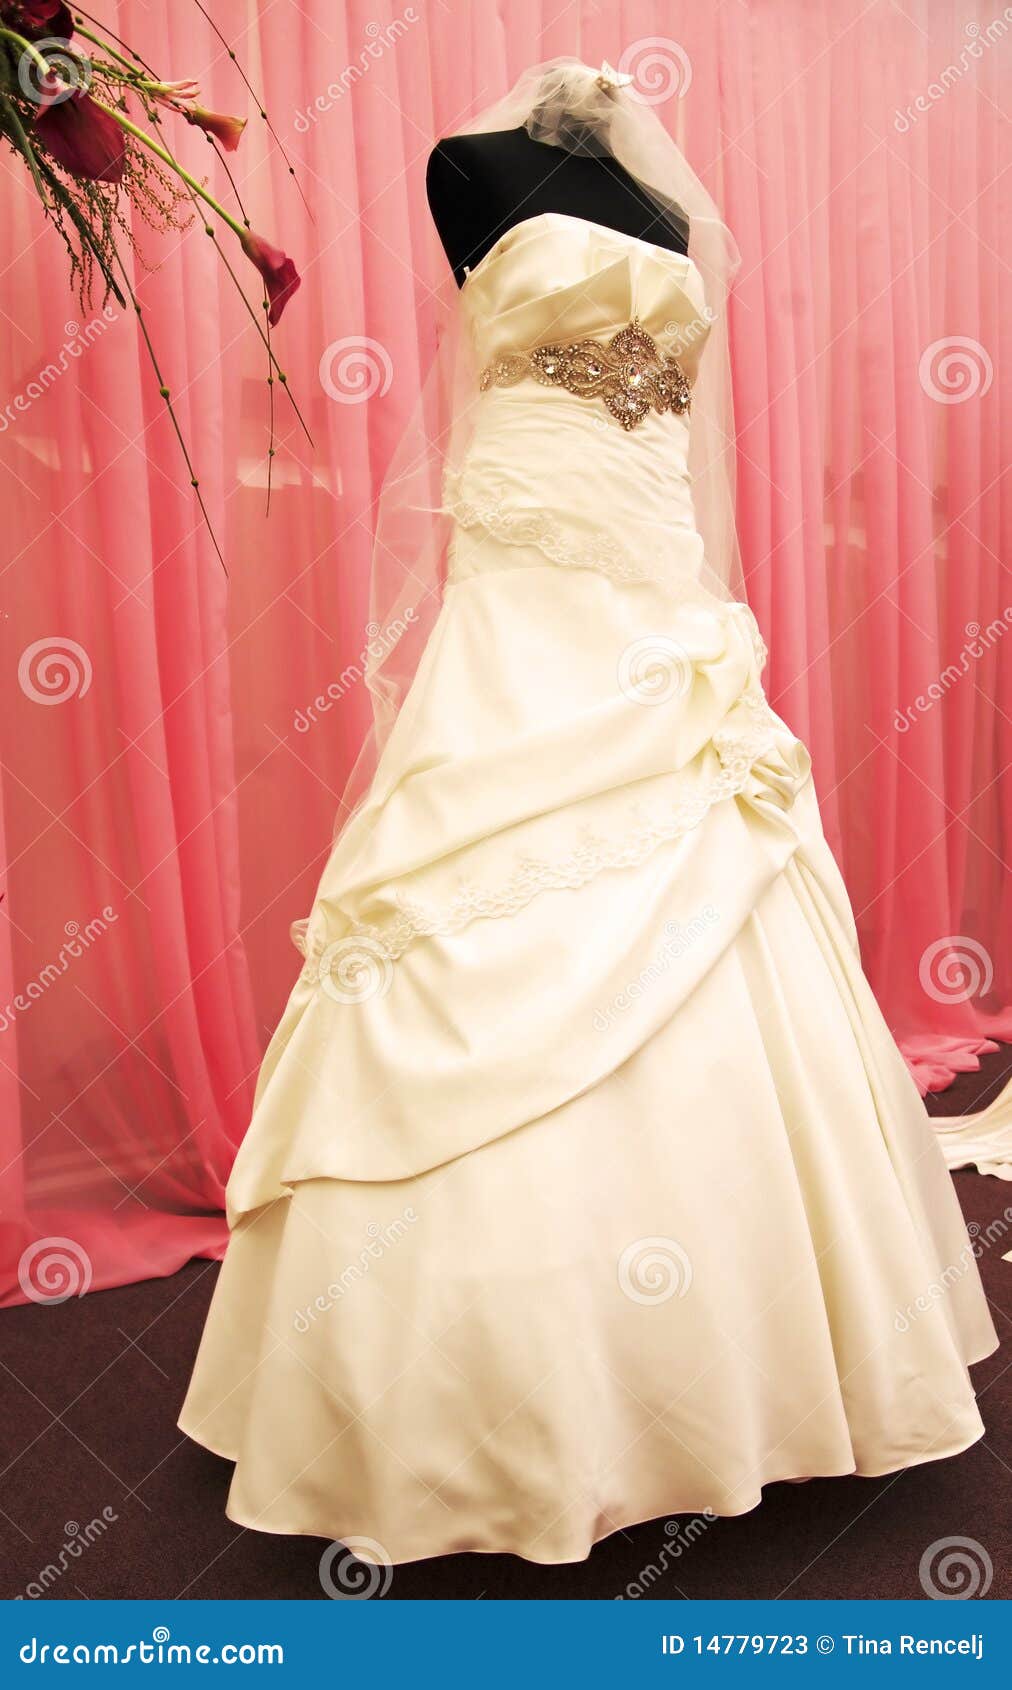 Woman Showing Panties While Bridal Gown Fitting In Wedding Fashion Store  Stock Photo, Picture and Royalty Free Image. Image 28495608.